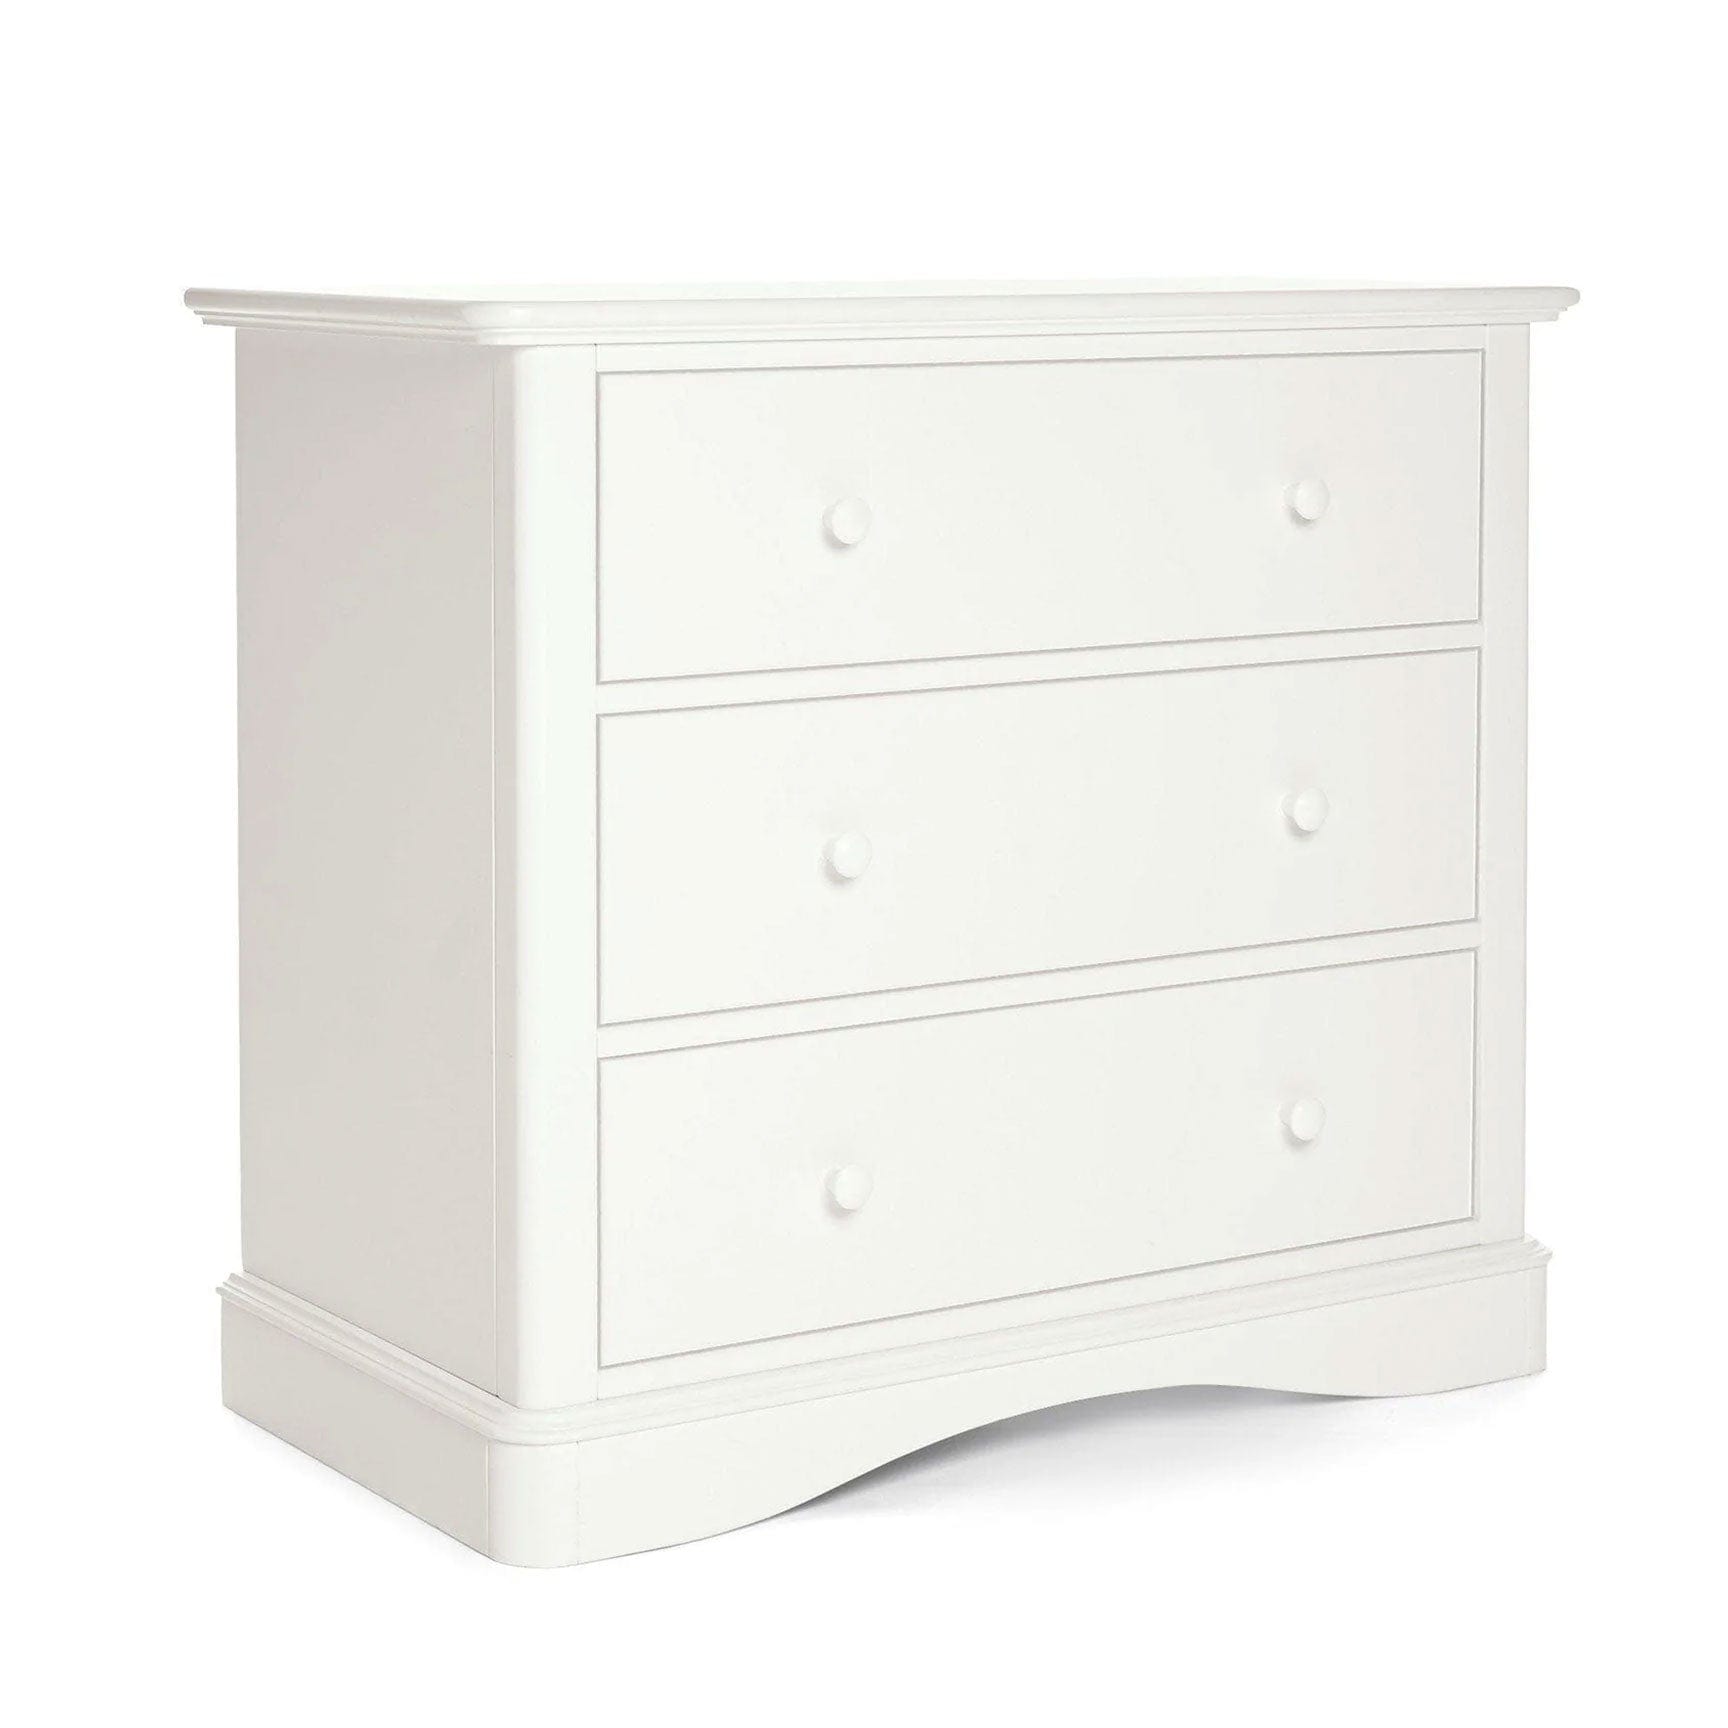 Mamas & Papas Nursery Room Sets Mamas & Papas Flyn 2 Piece Cotbed and Dresser Changer Set - White